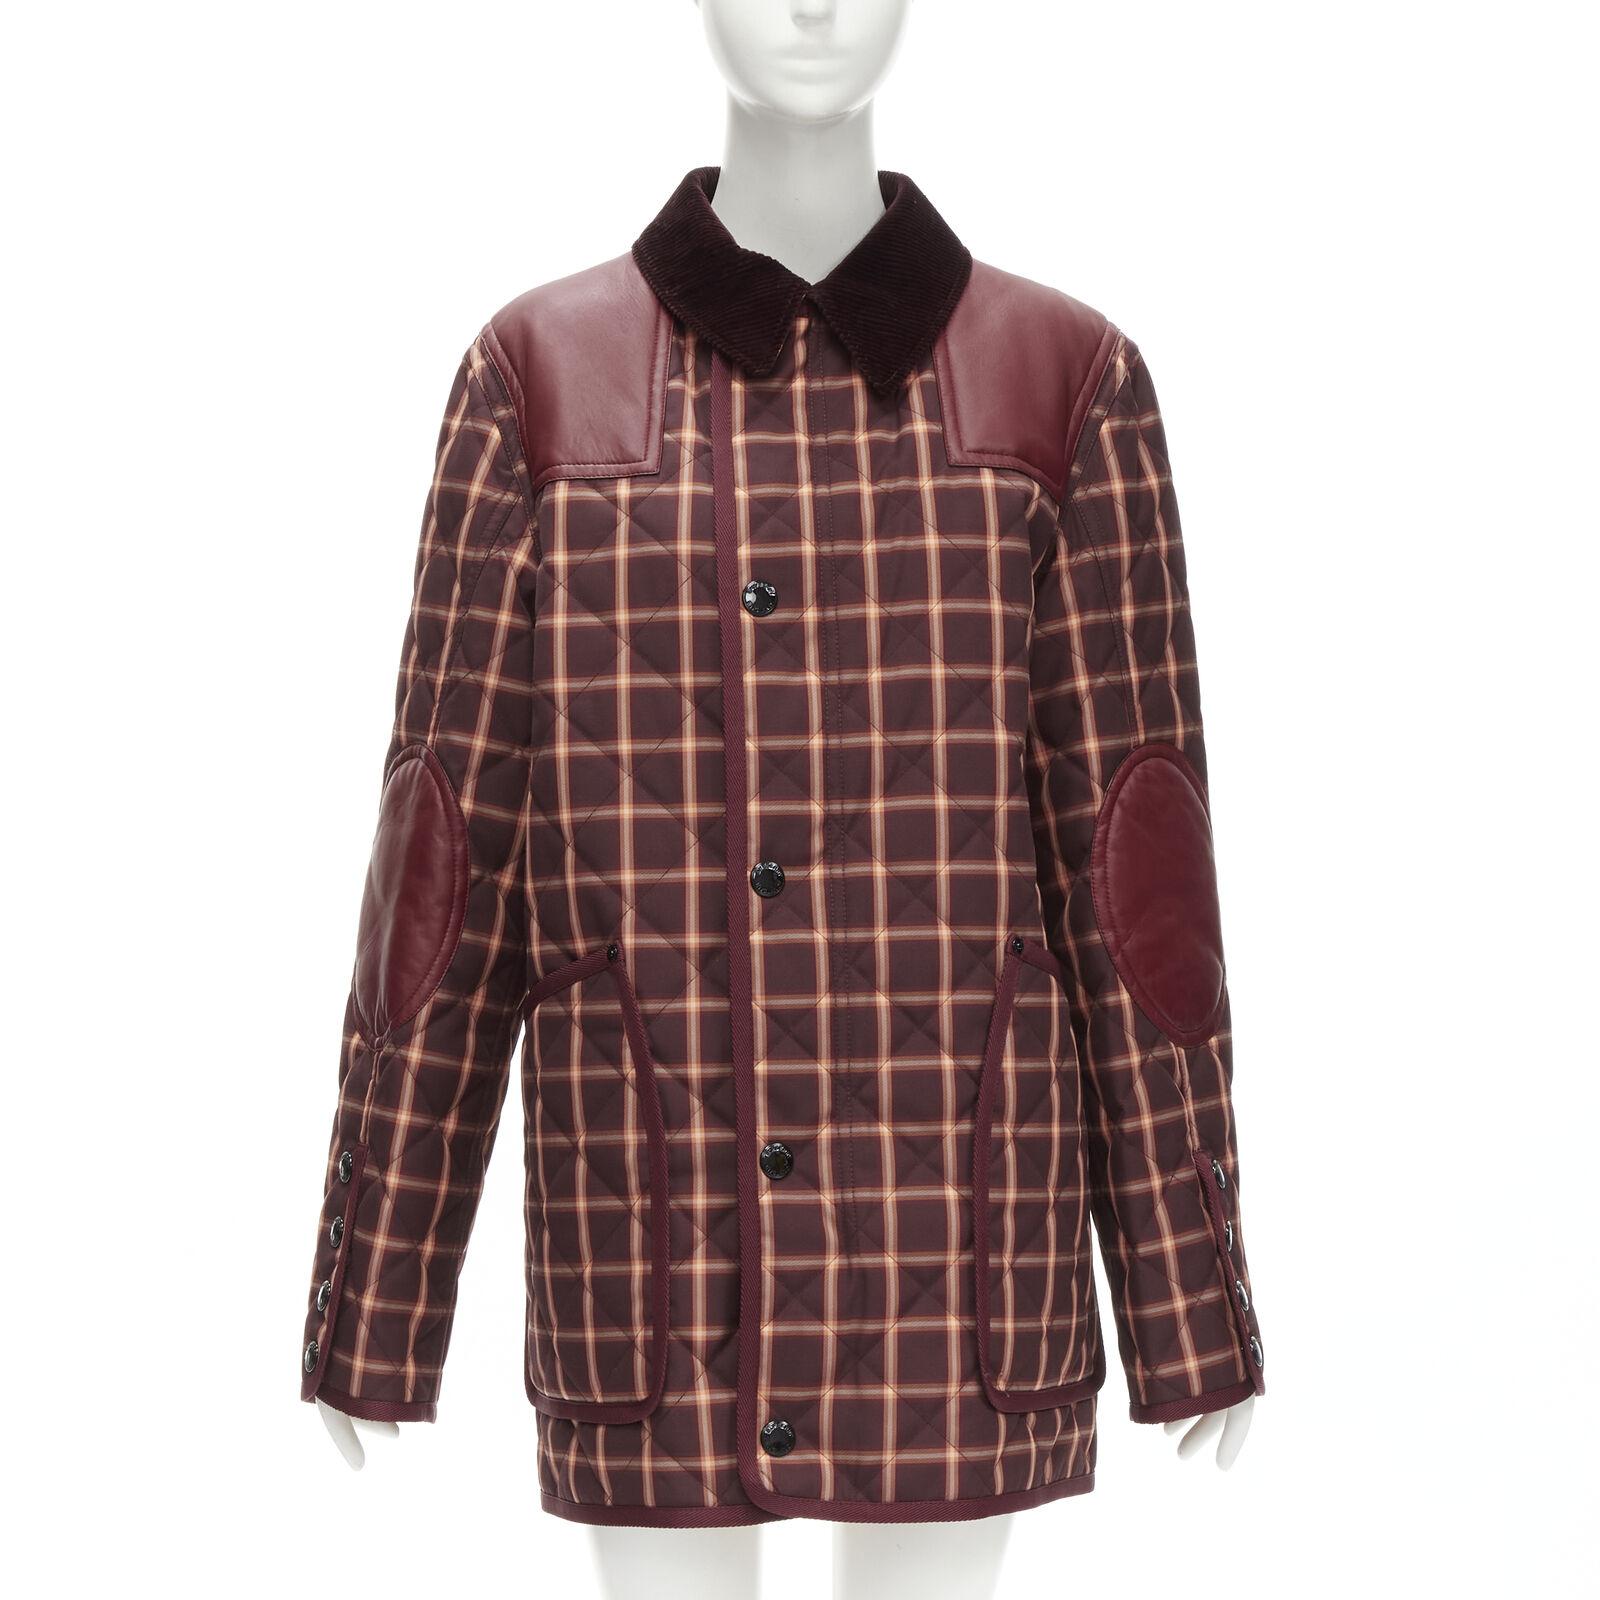 new BURBERRY RICCARDO TISCI Reversible Burgundy Check leather patch jacket XS
Reference: TGAS/C01548
Brand: Burberry
Designer: Riccardo Tisci
Collection: Runway
Material: Polyester, Blend
Color: Burgundy
Pattern: Checkered
Closure: Snap